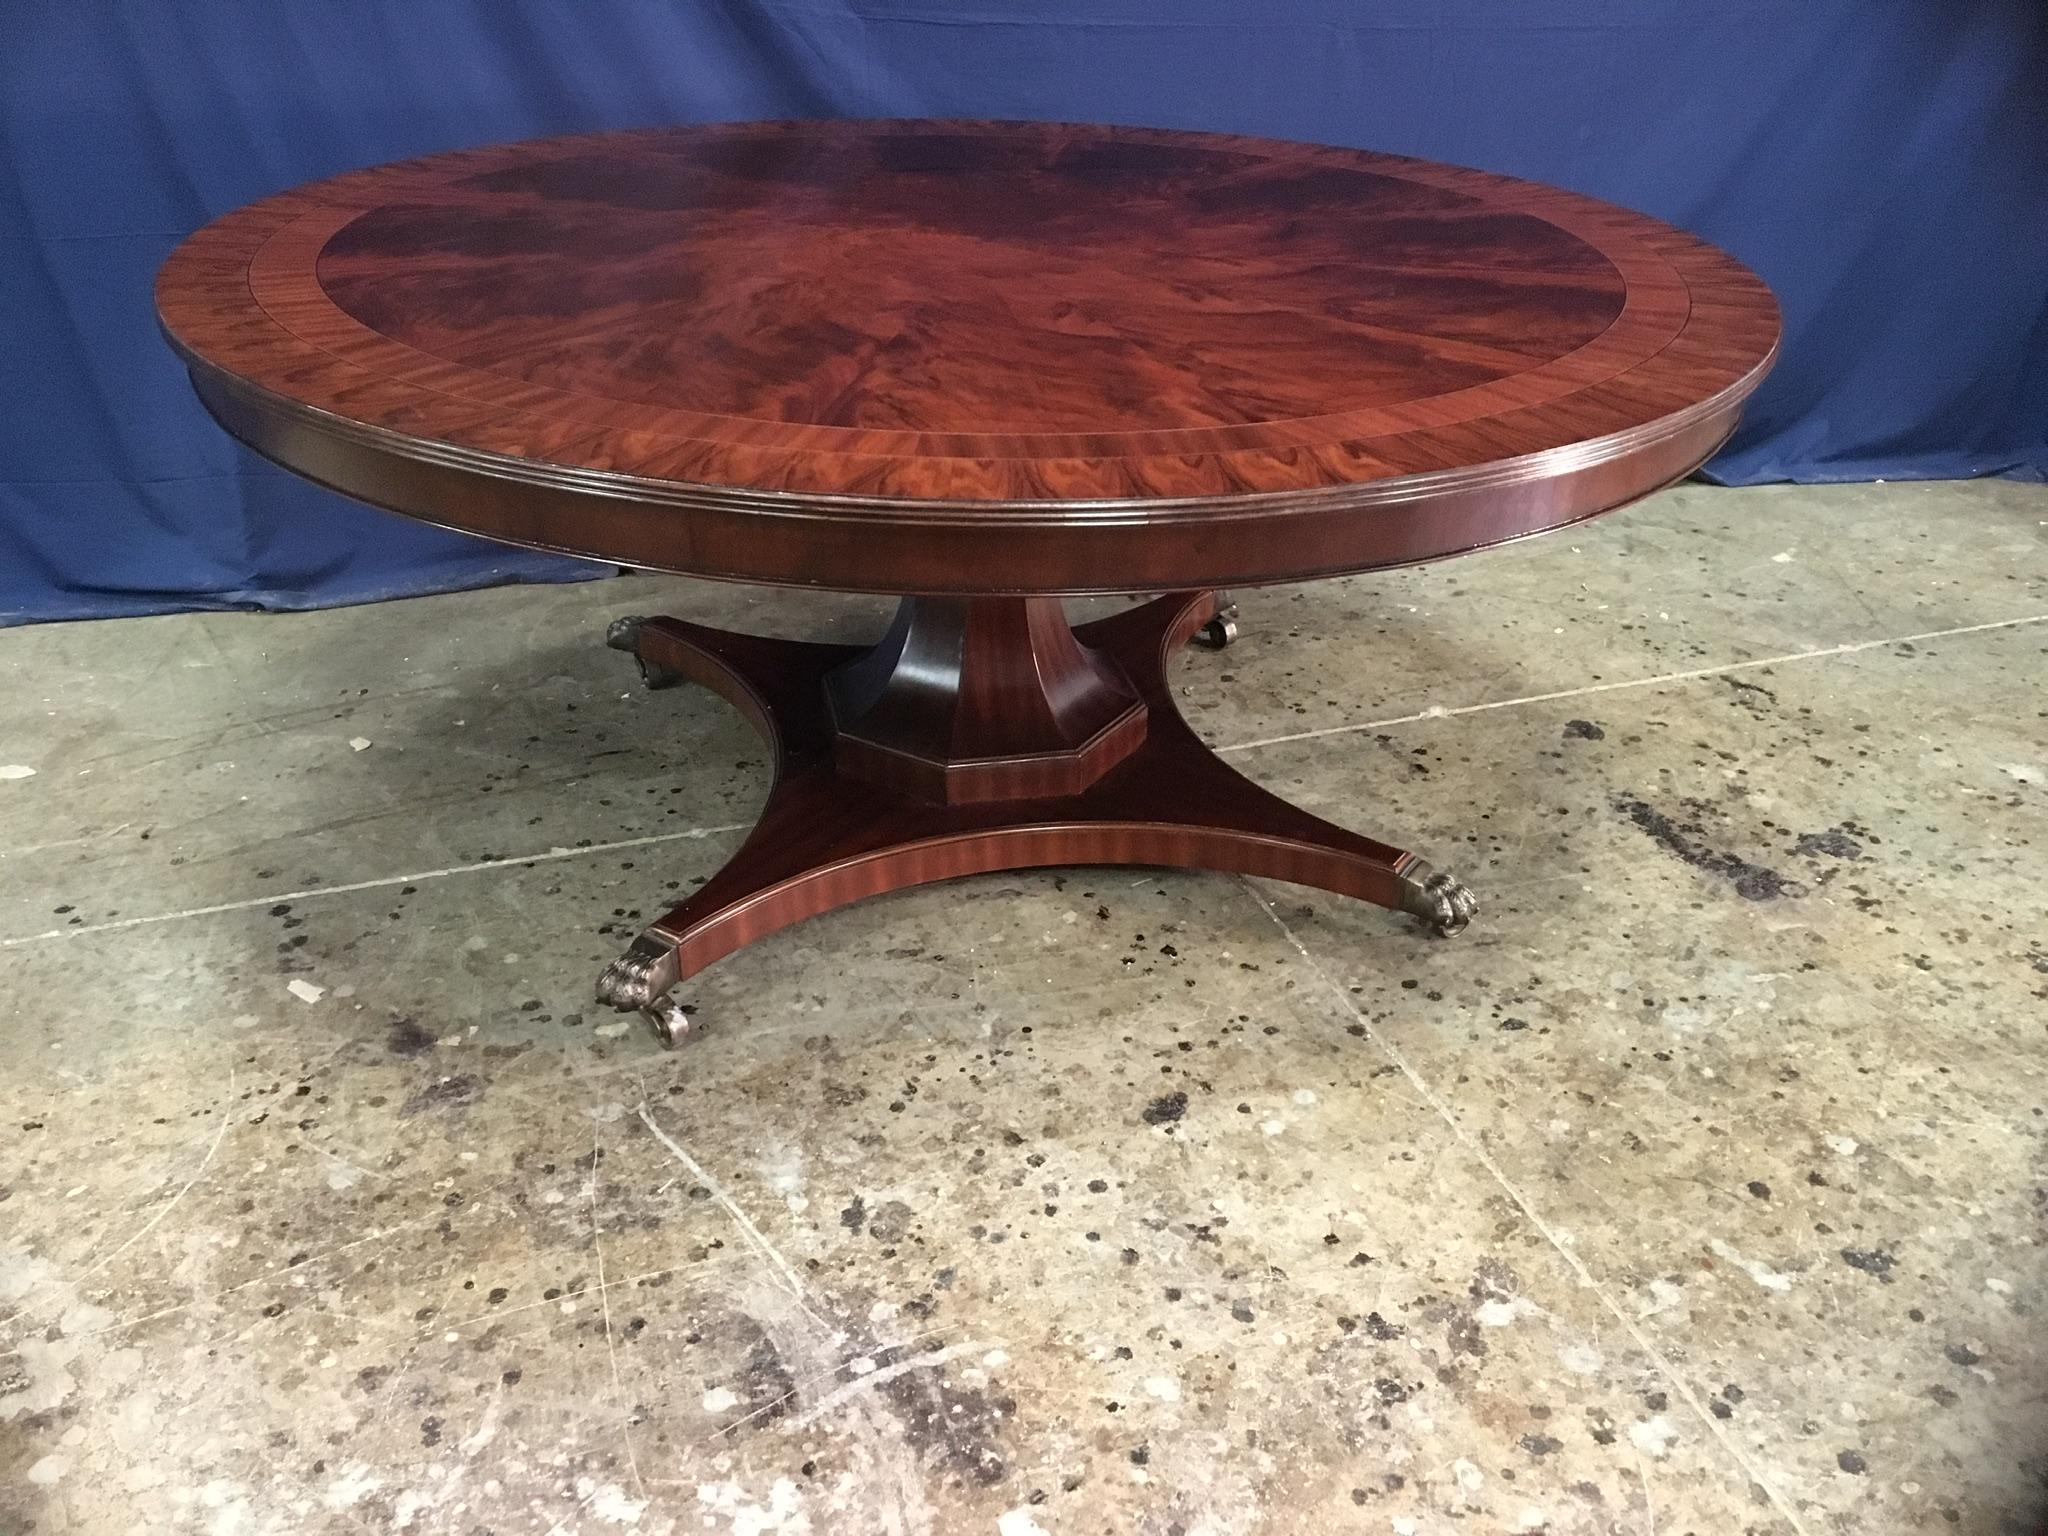 This is made-to-order large round traditional mahogany dining table made in the Leighton Hall shop. It features a radial cut field of west African swirly crotch mahogany and two borders of straight grain mahogany and santos rosewood. It has a hand